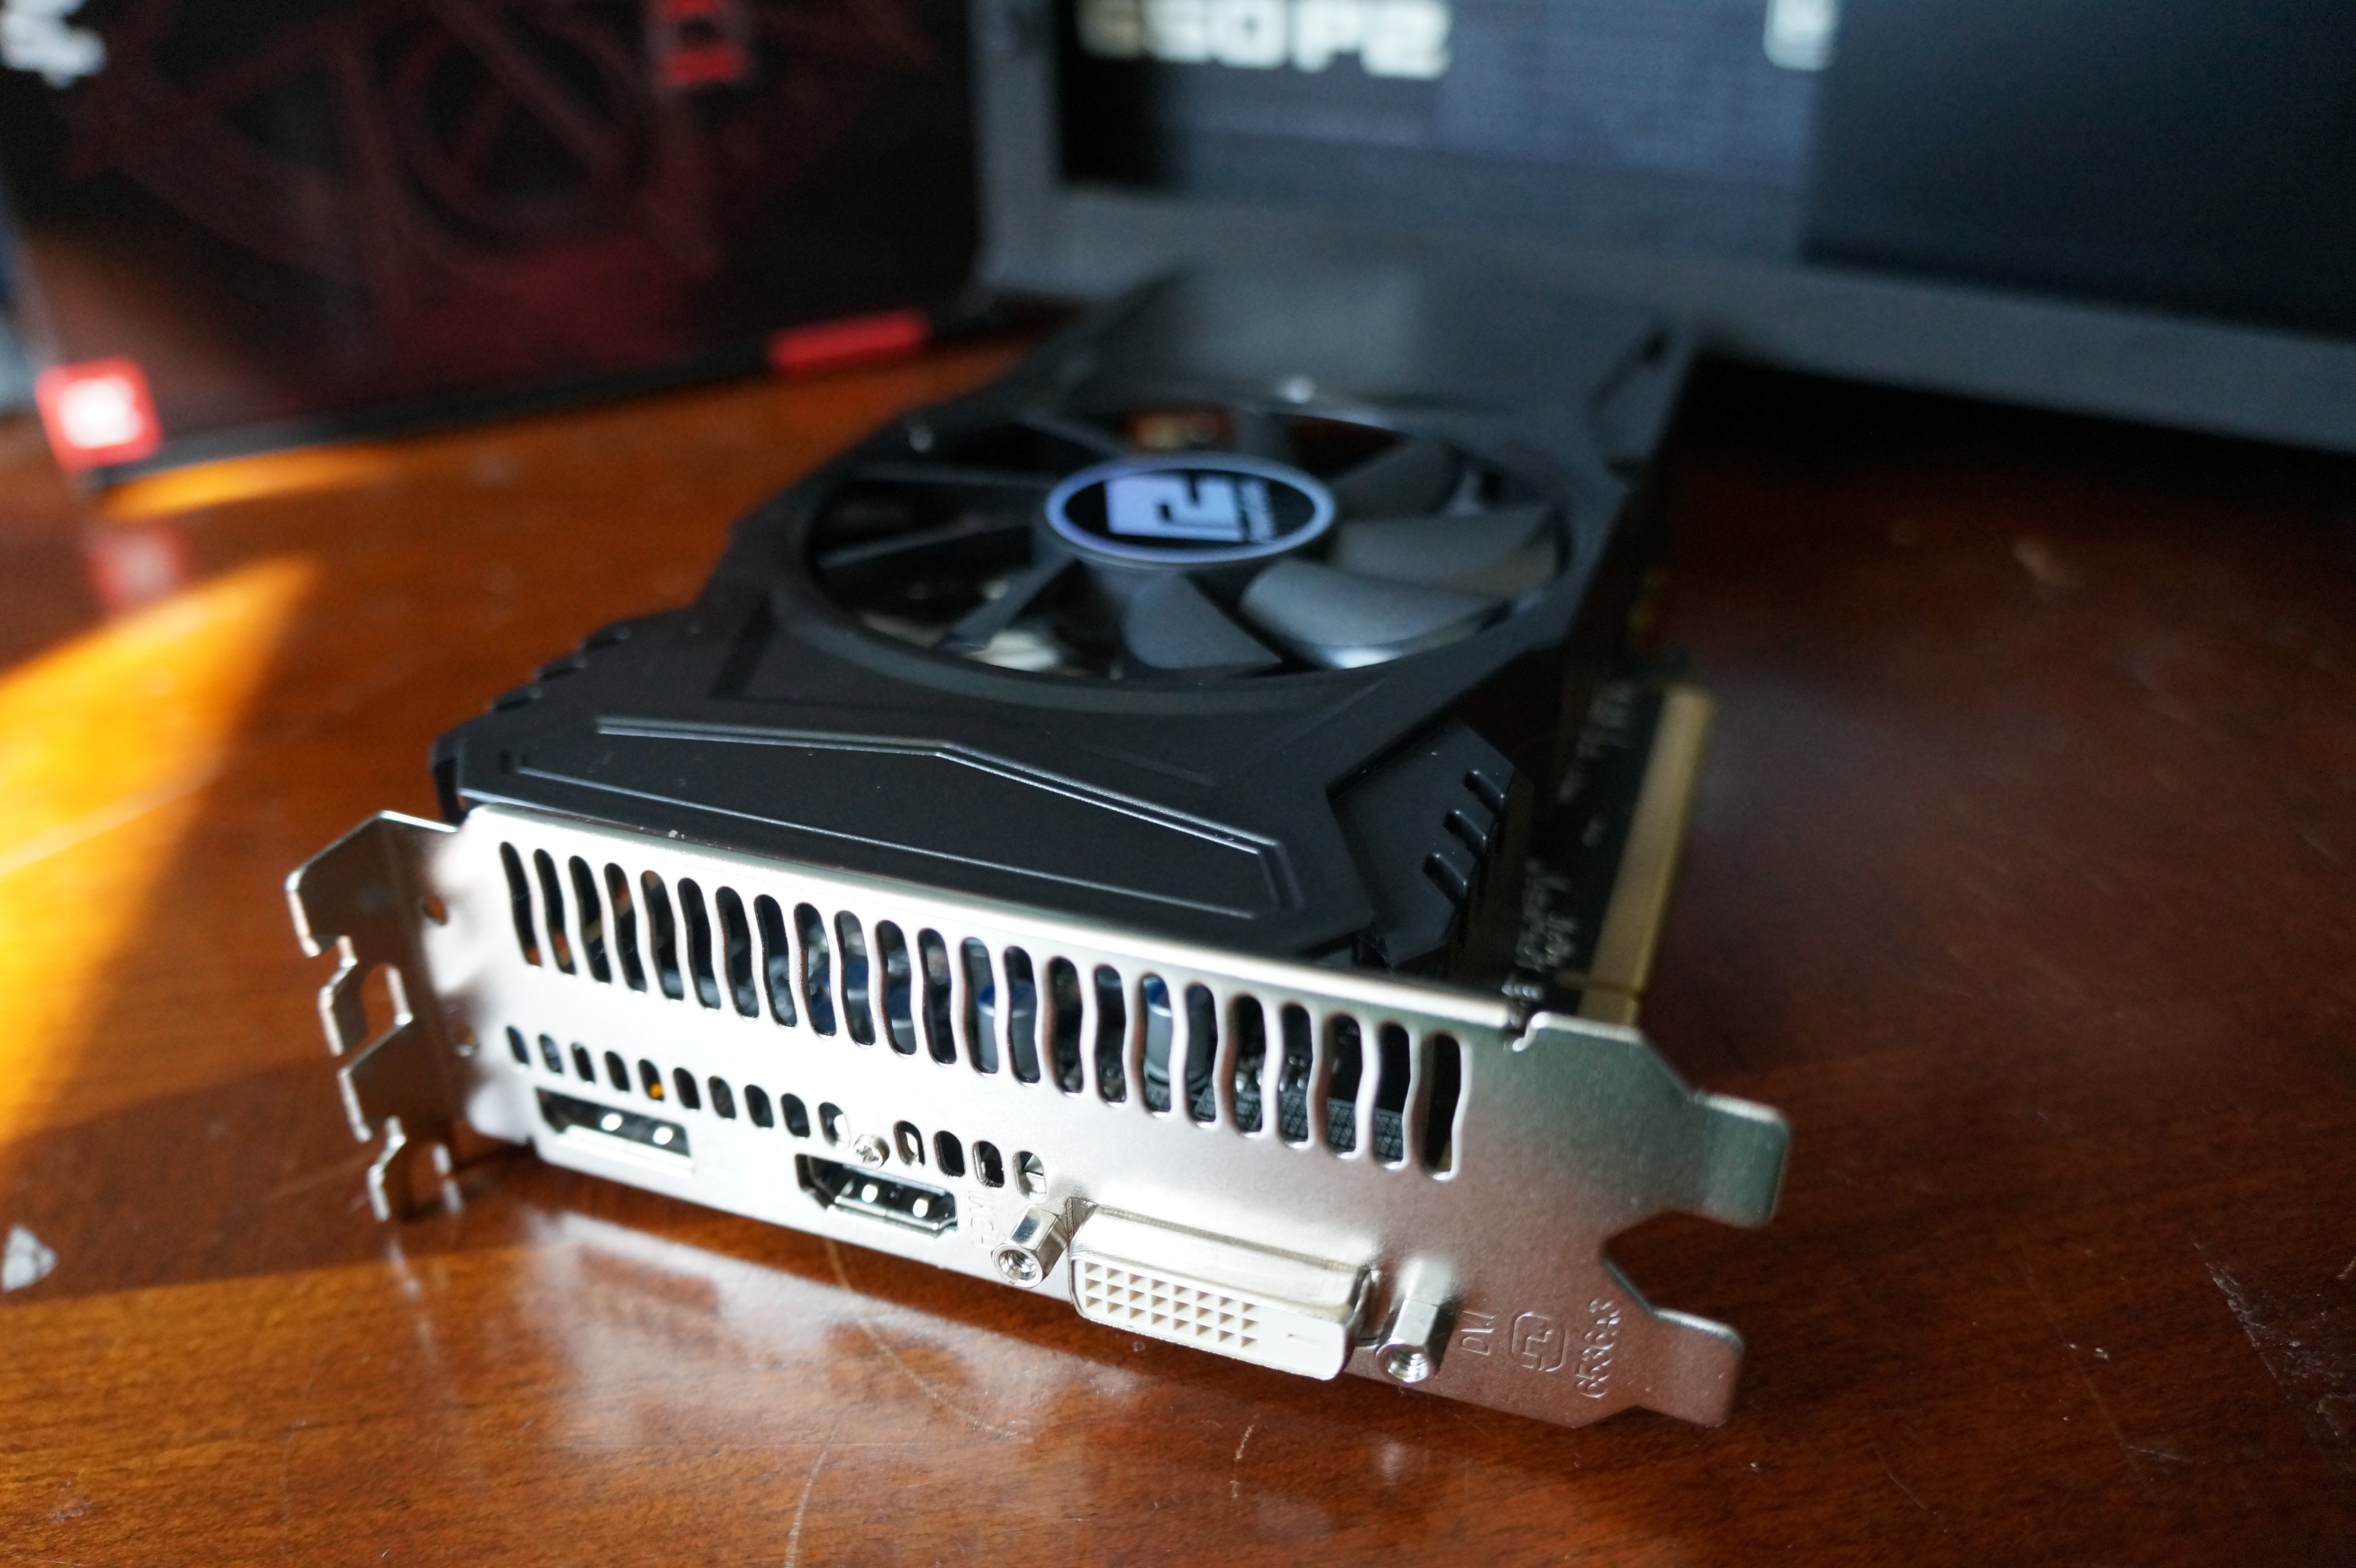 AMD Radeon RX 550 review: A thrilling 